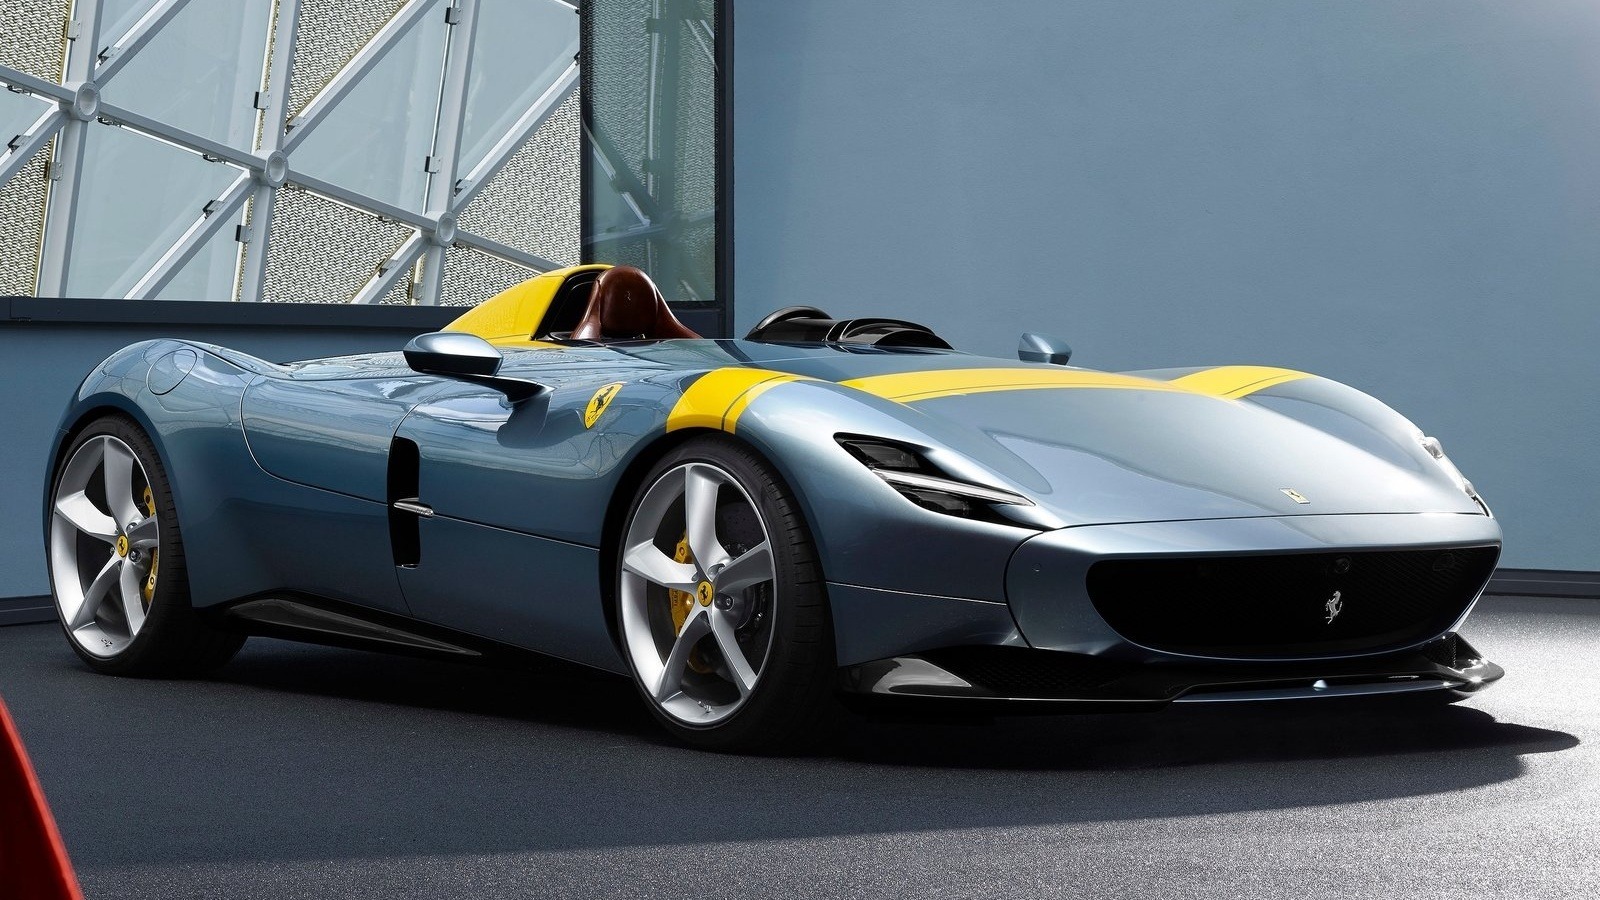 The 10 Coolest Features On The Ferrari Monza SP1